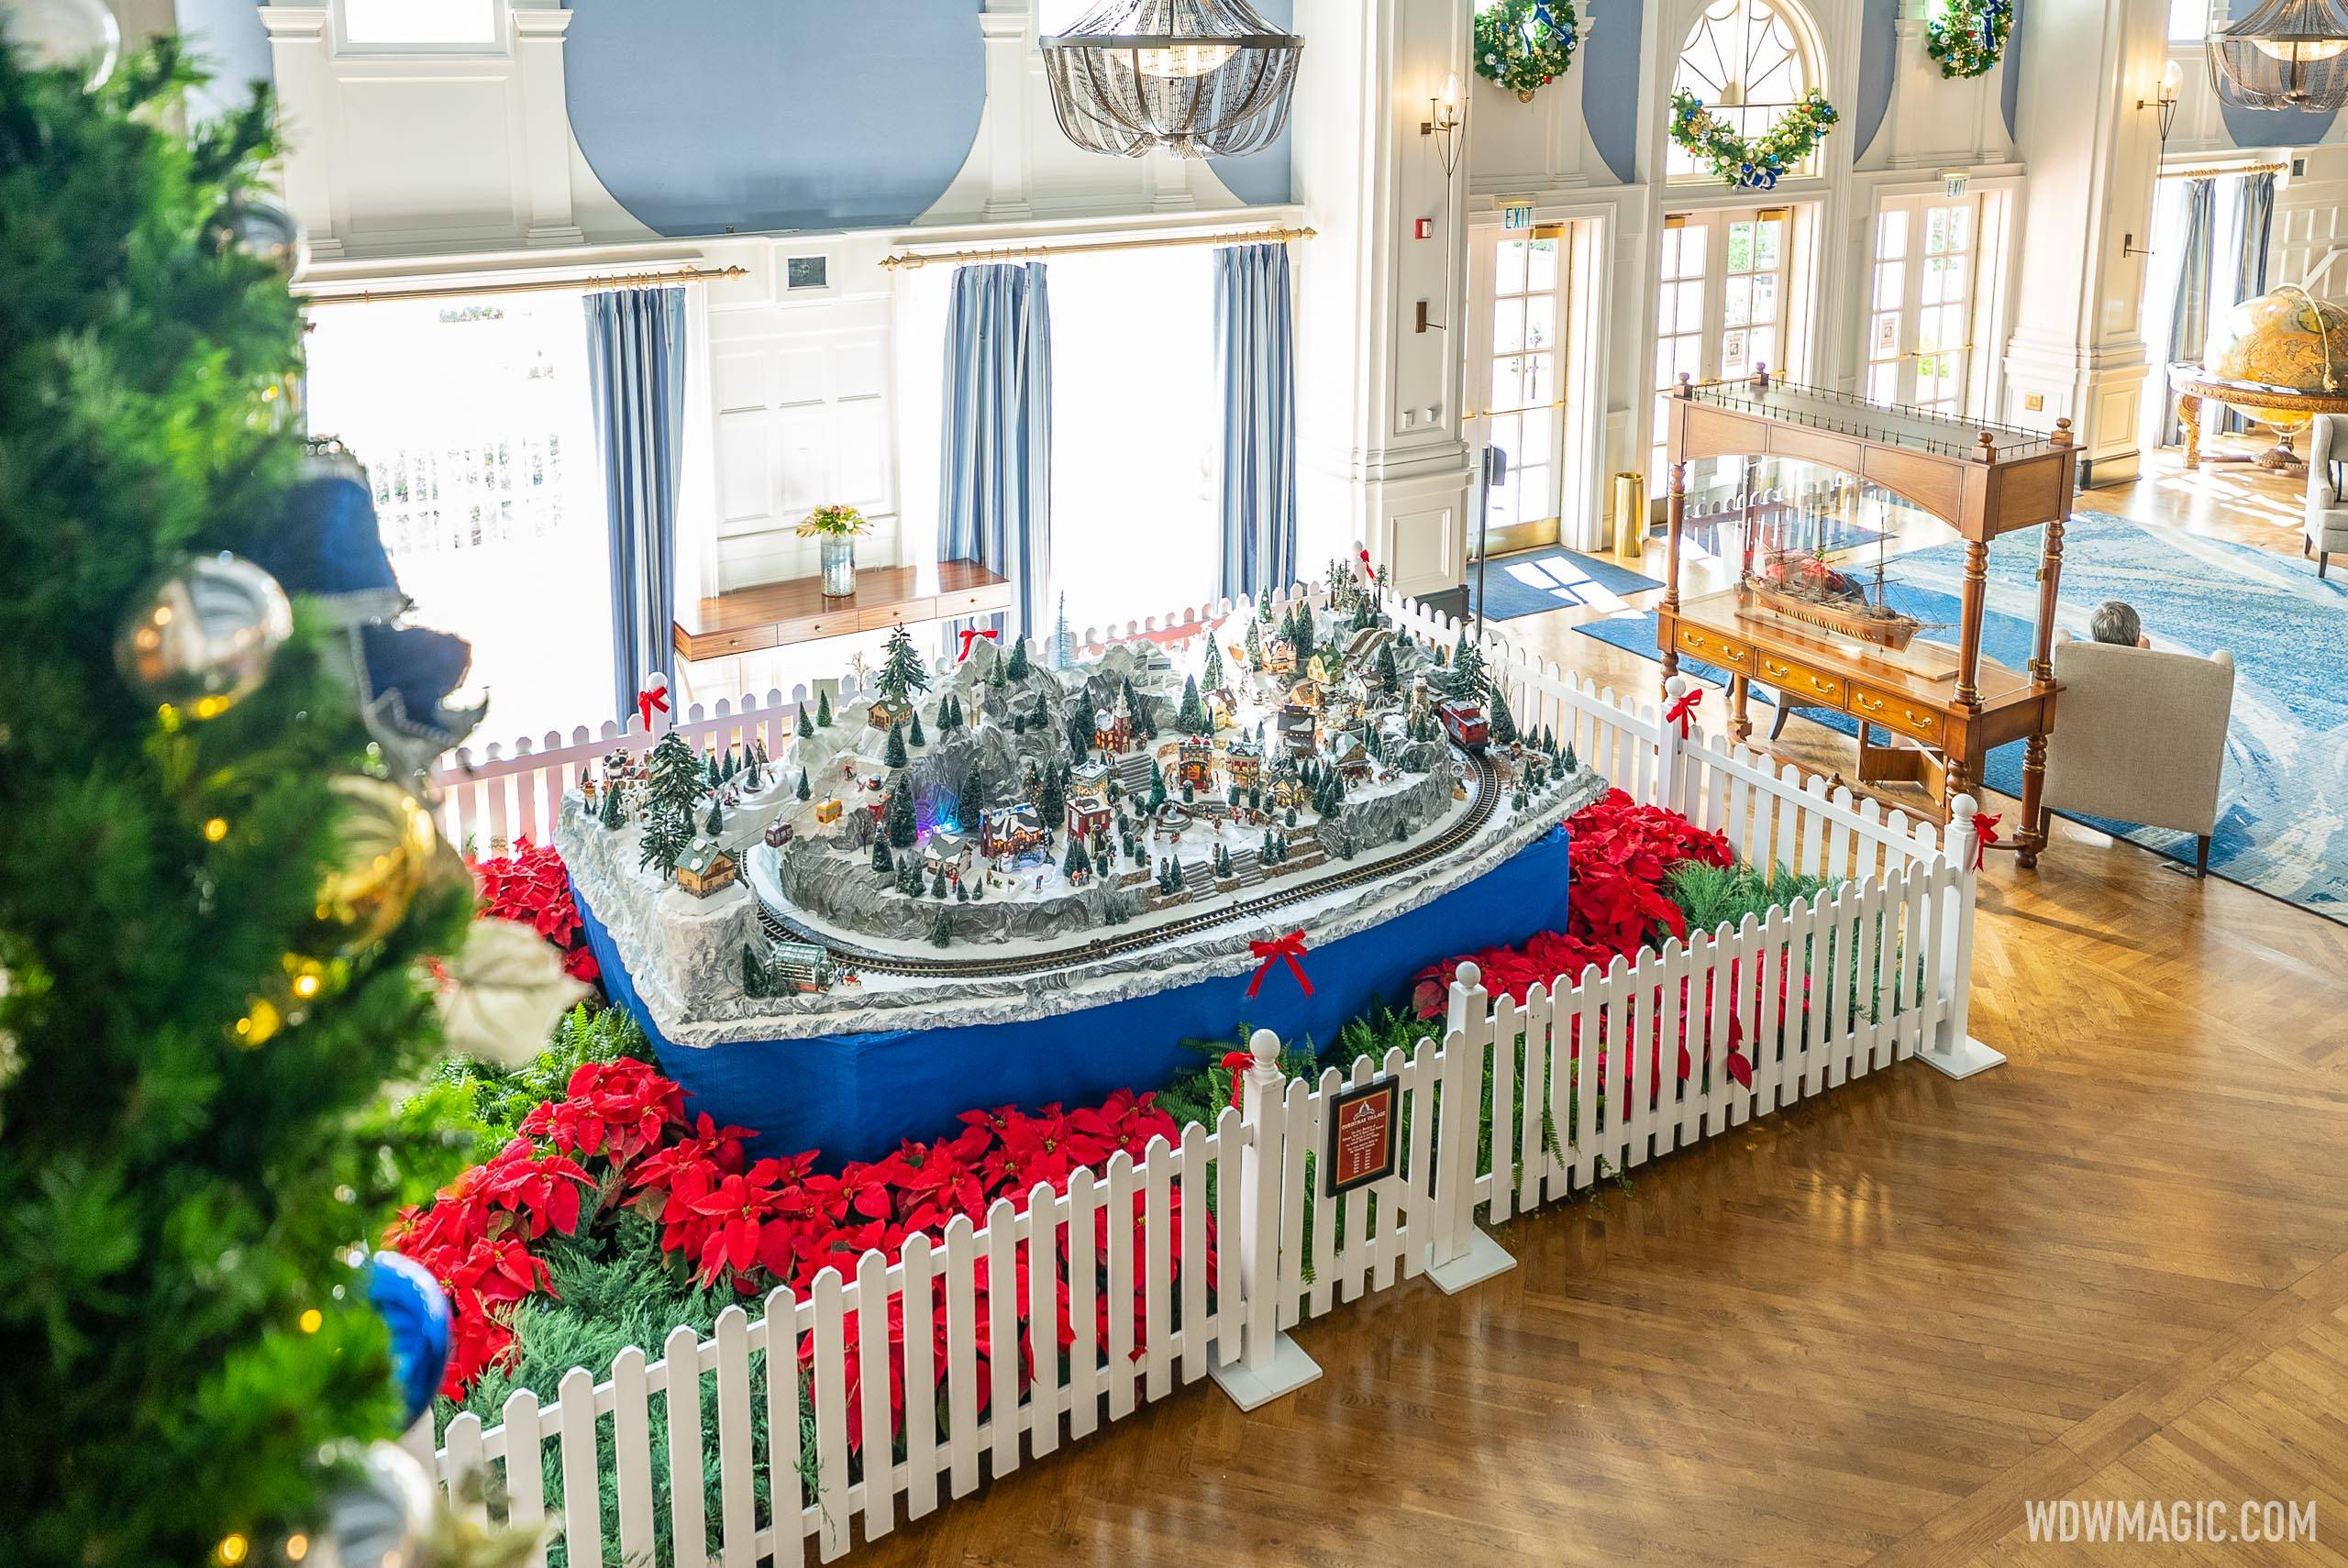 An overhead view of the Yacht Club Christmas model village